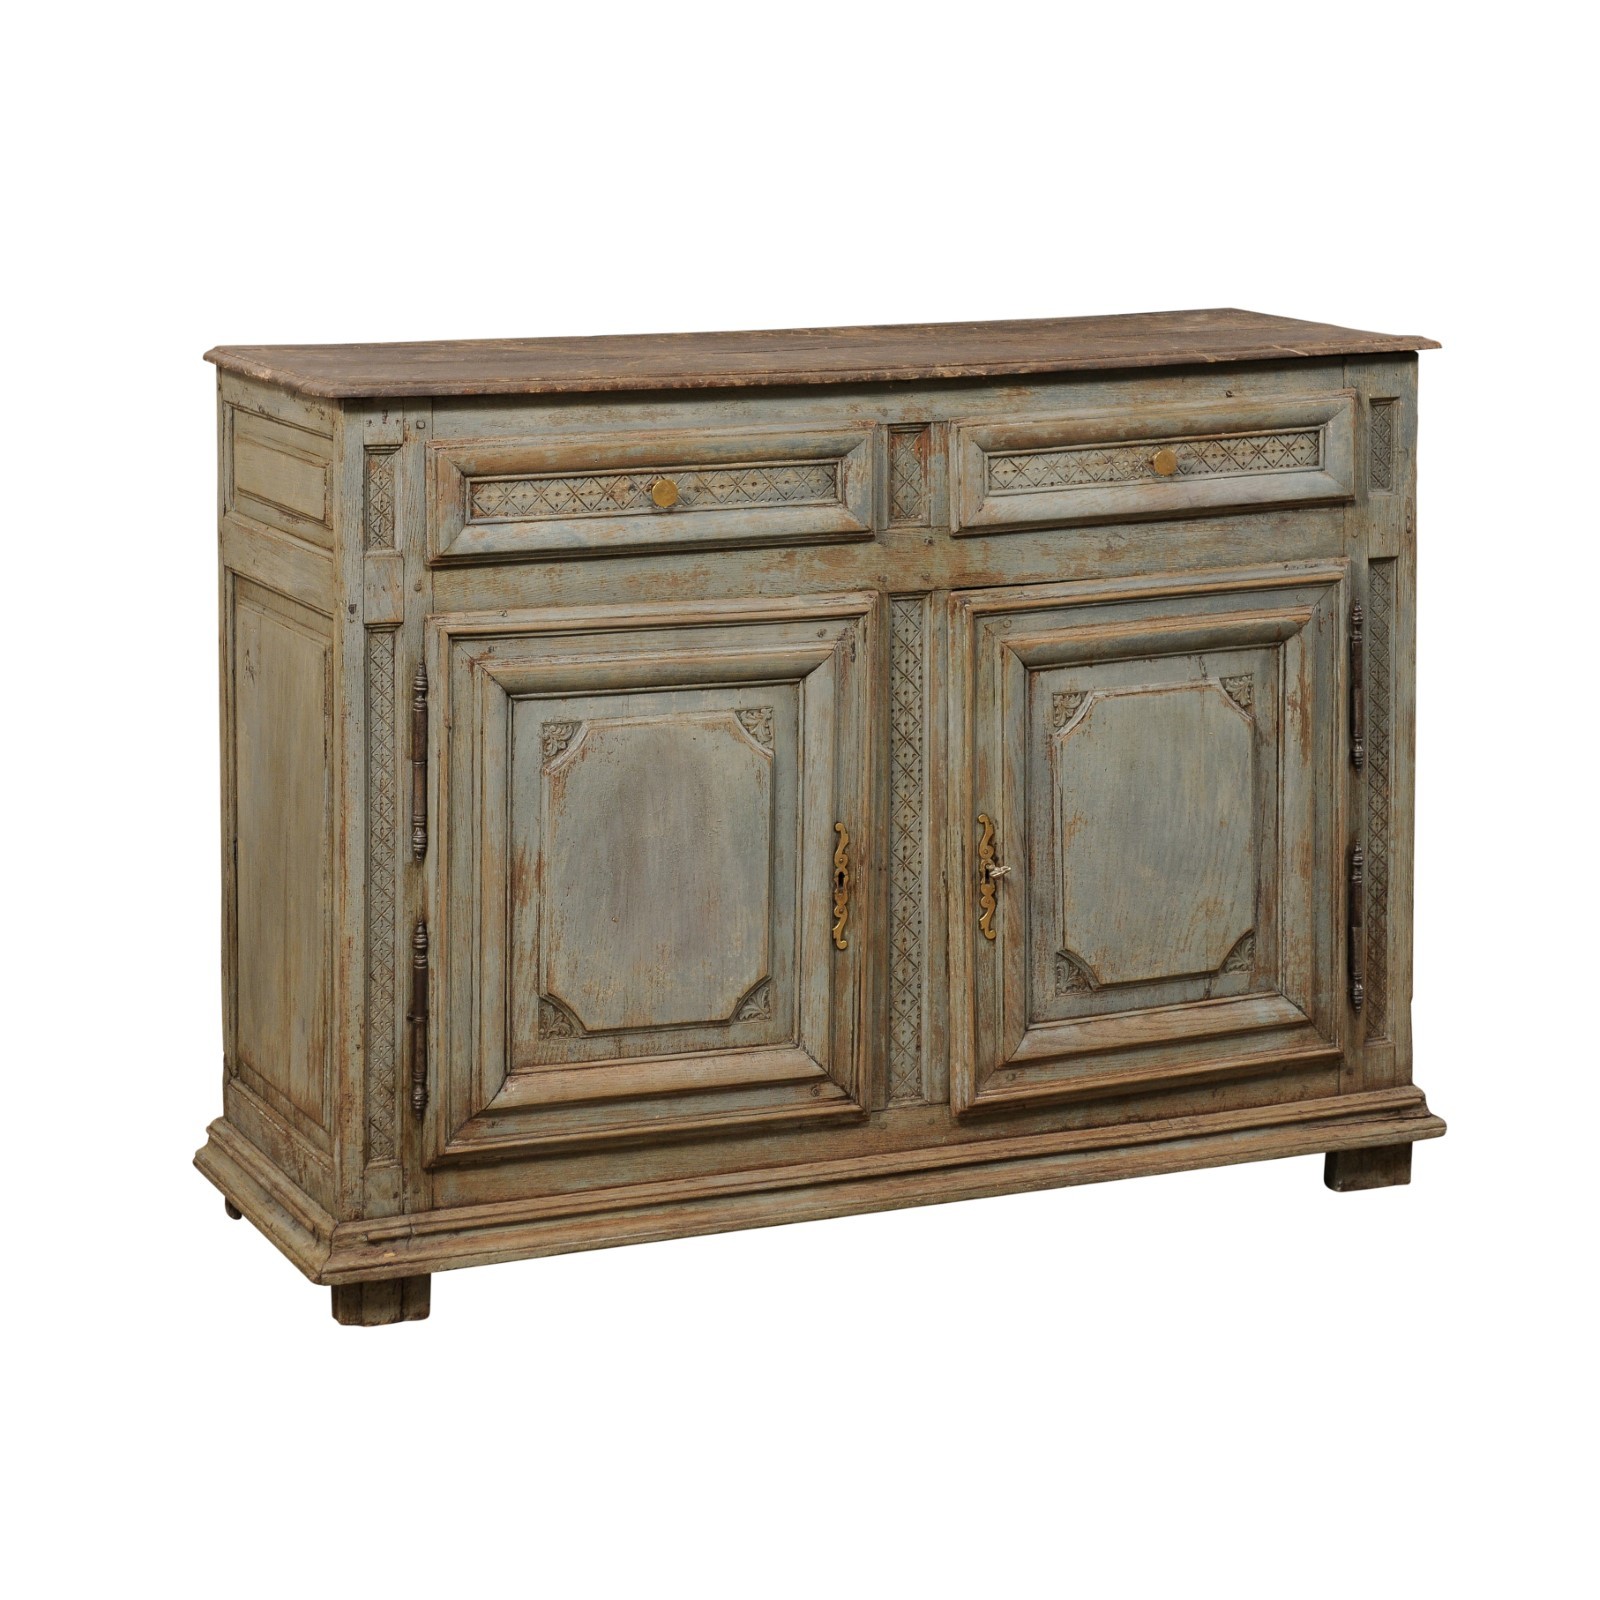 An Early 19th C. French Painted Cabinet